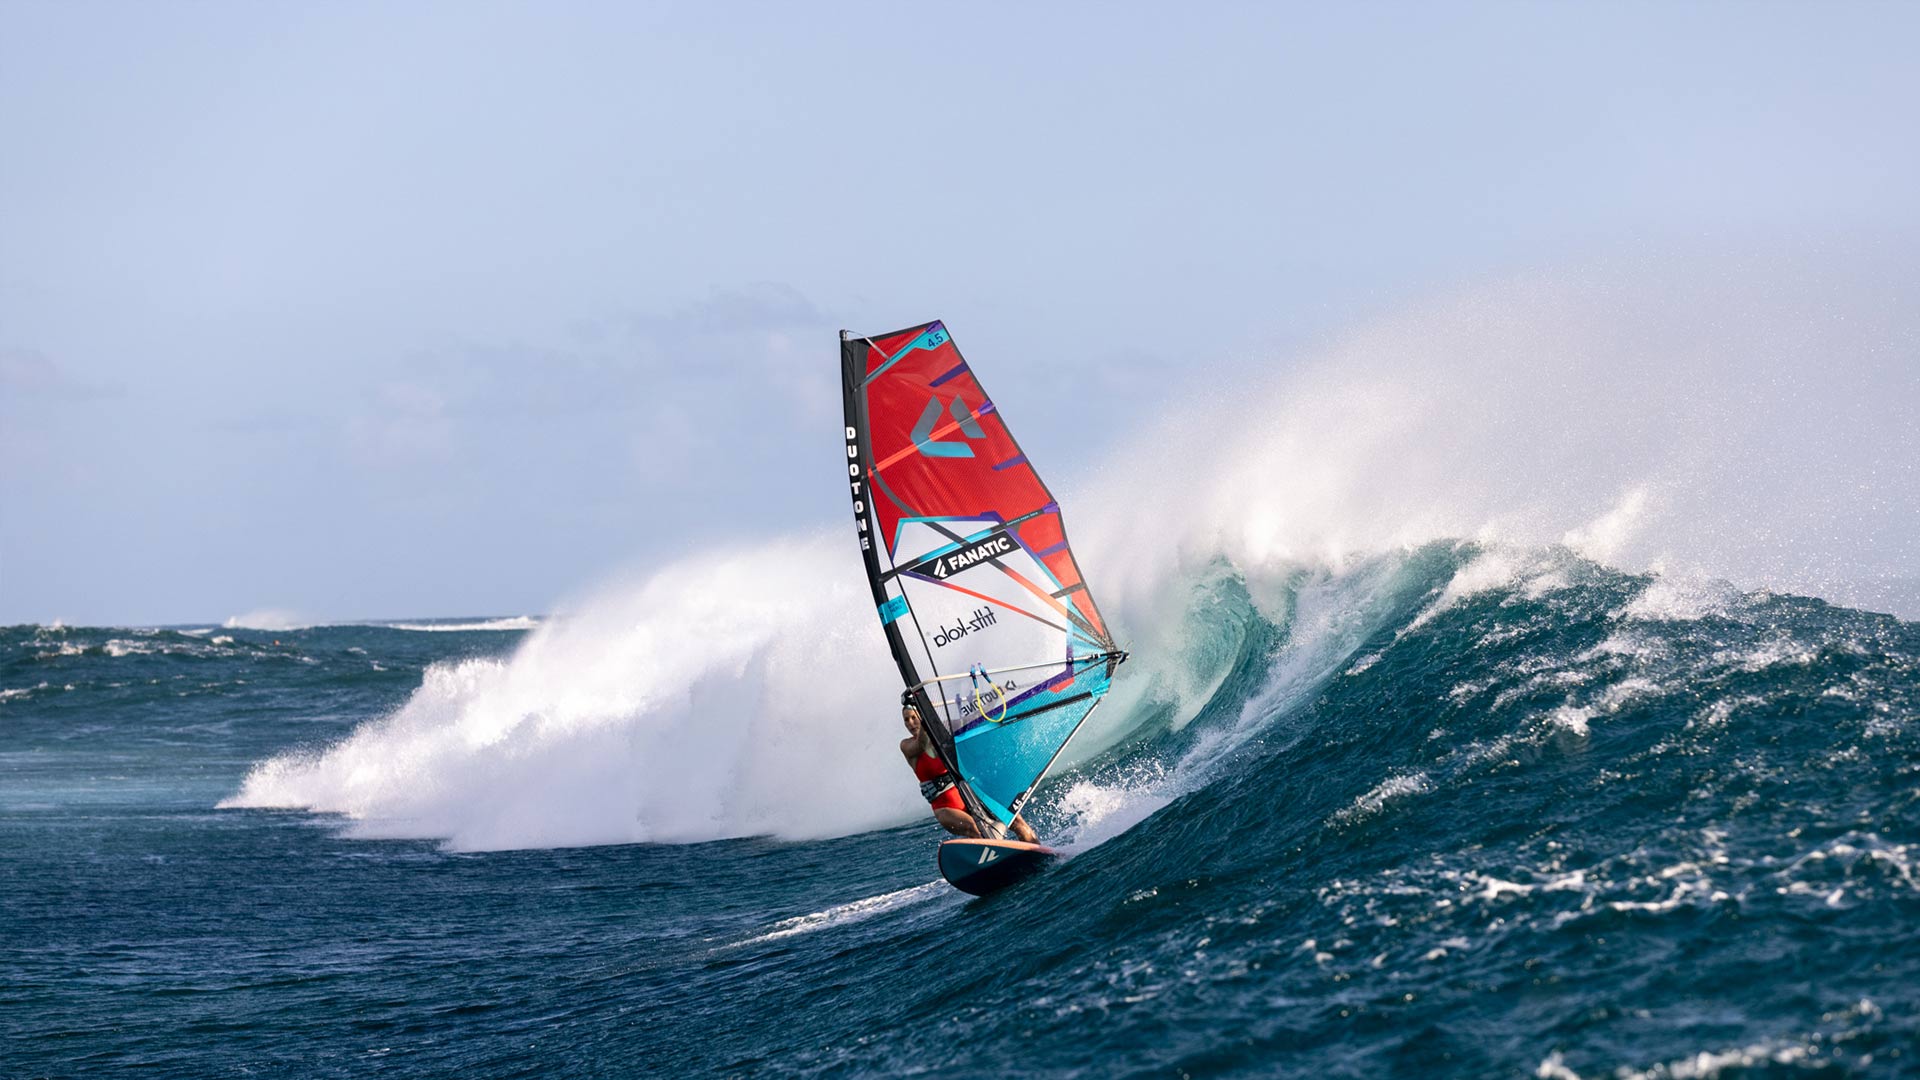 Big and beautiful One Eye wave catching for a professional windsurfer